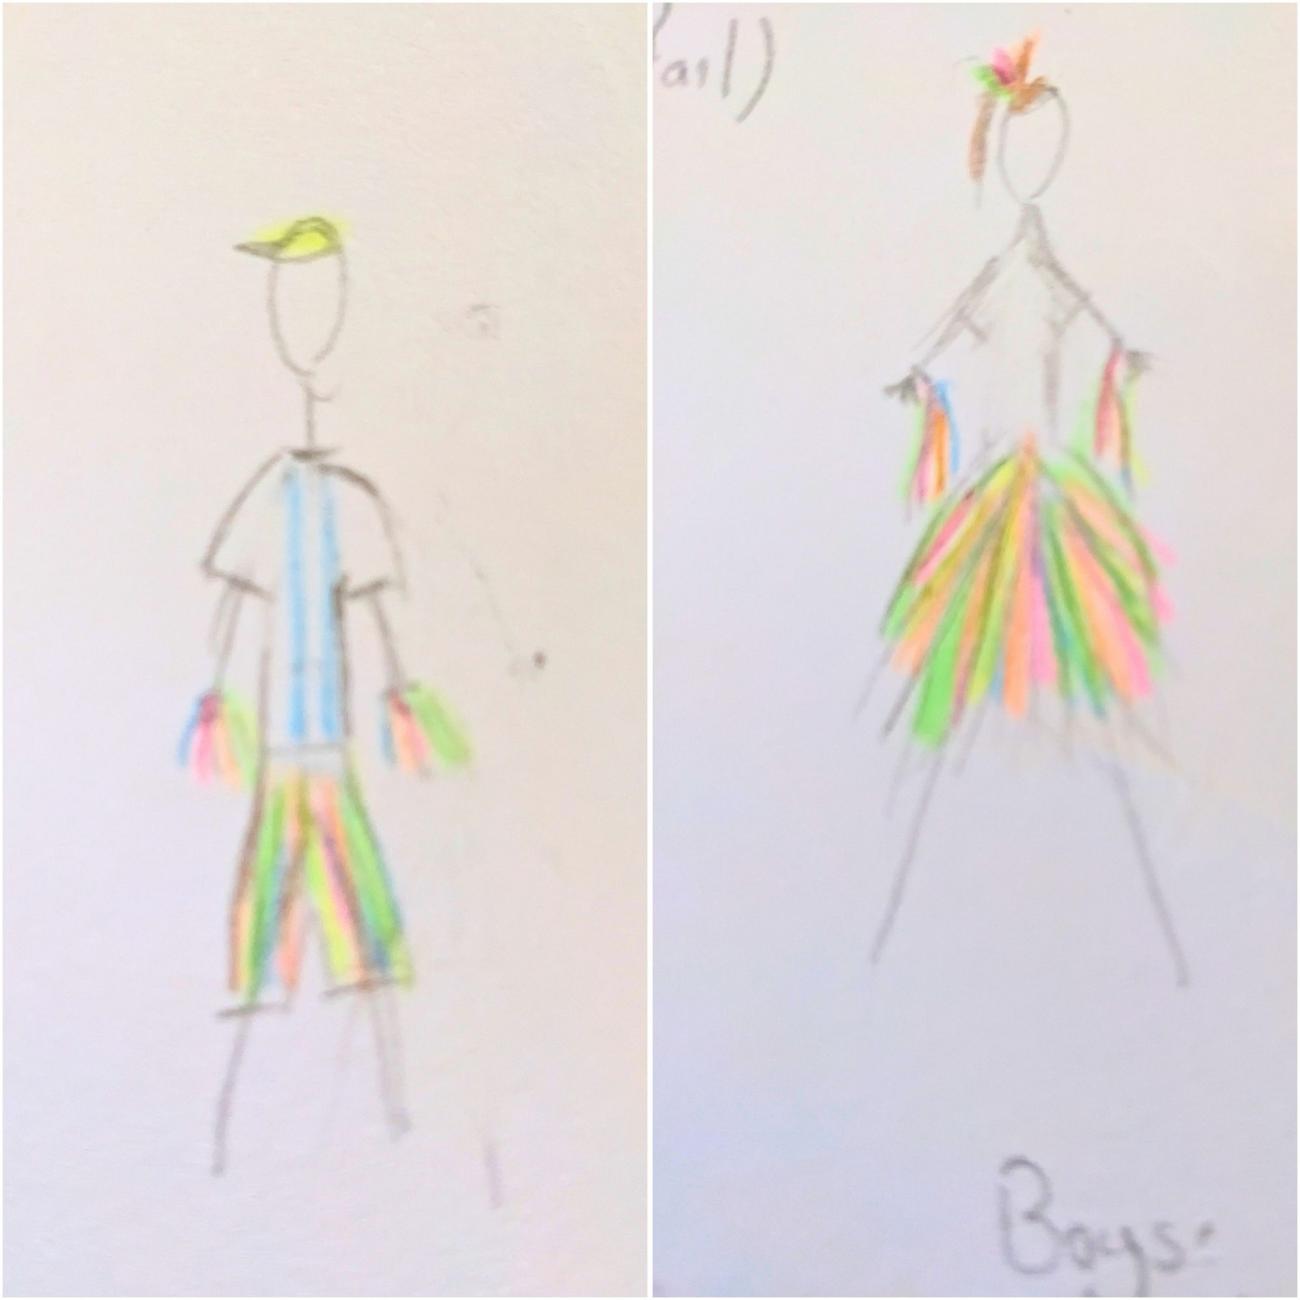 Illustrated costume designs for a boy and a girl, each wearing a white top and shoes, and colourful shorts and skirt, cap and wristbands